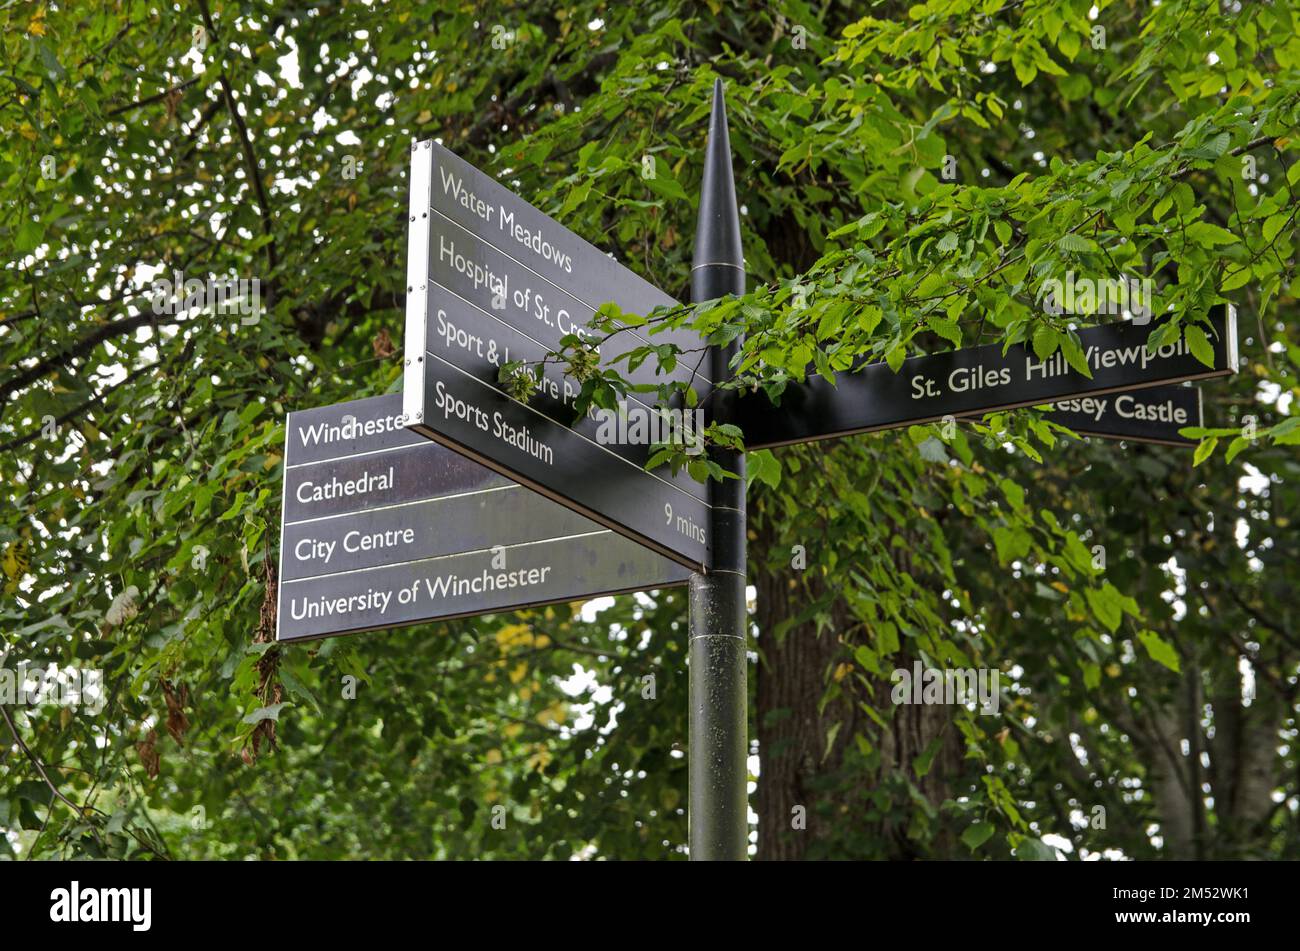 A signpost for pedestrians showing the direction of a number of attractions in the city of Winchester, Hampshire. Stock Photo